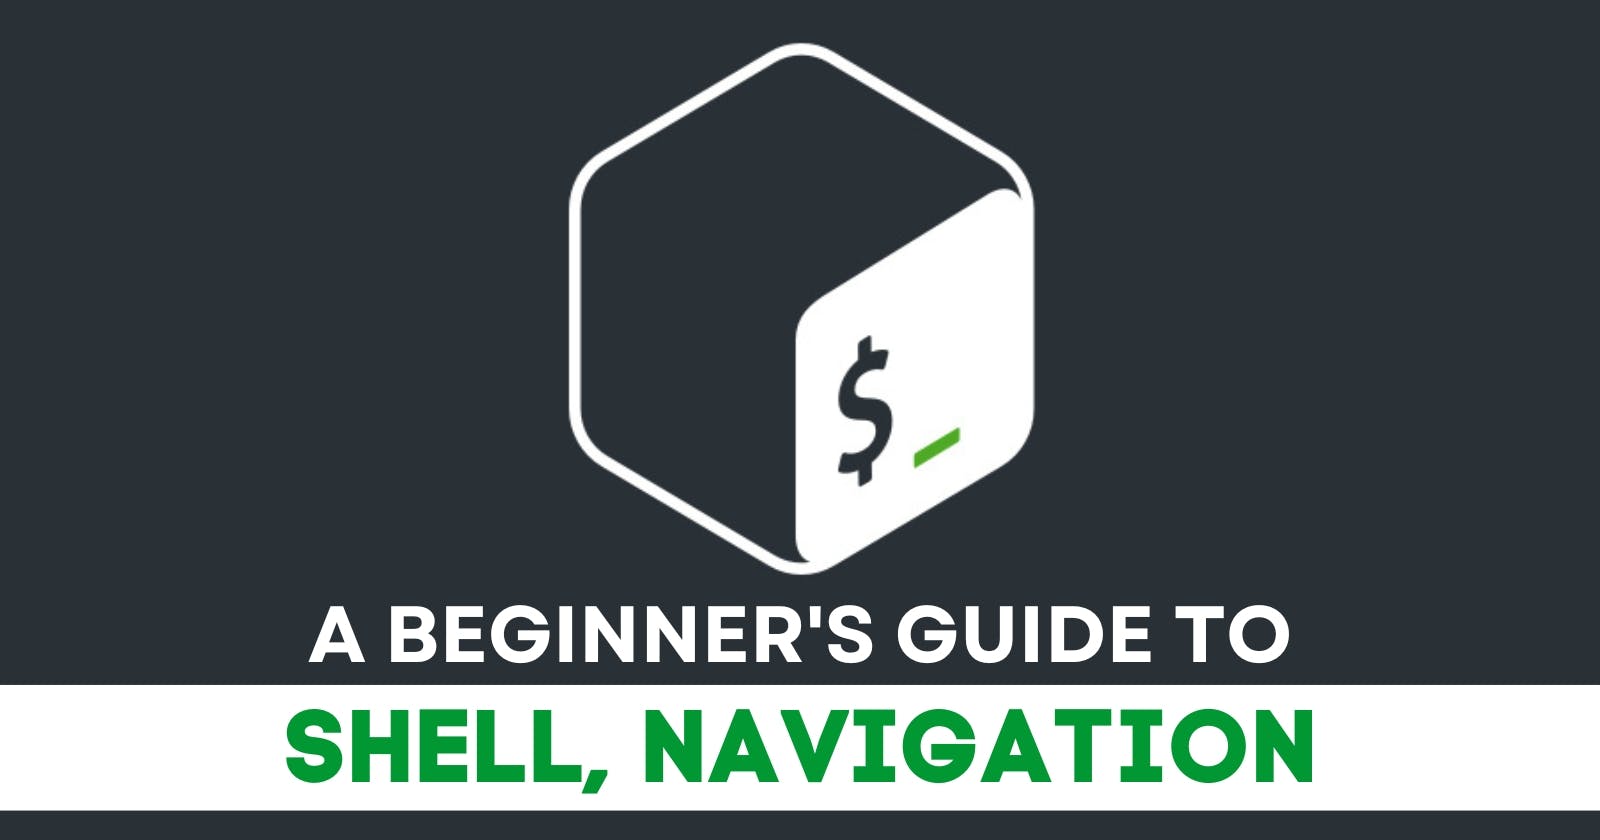 A Beginner's Guide to Shell, Navigation